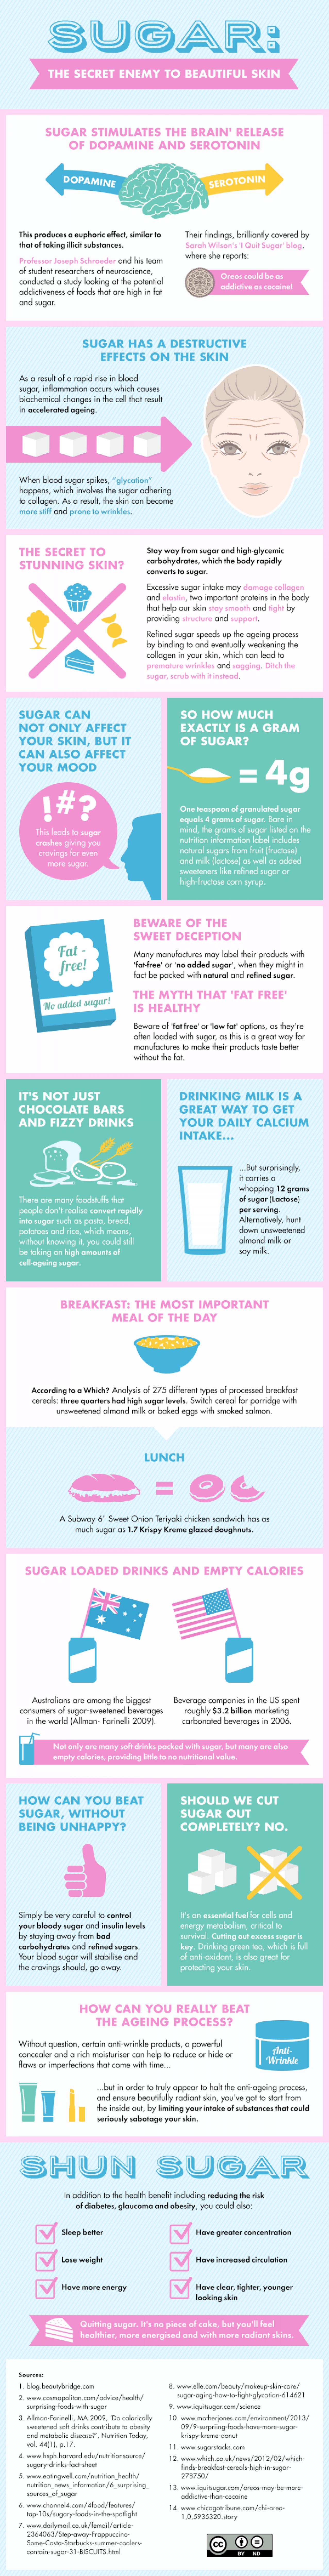 Sugar - the secret enemy to beautiful skin? Infographic